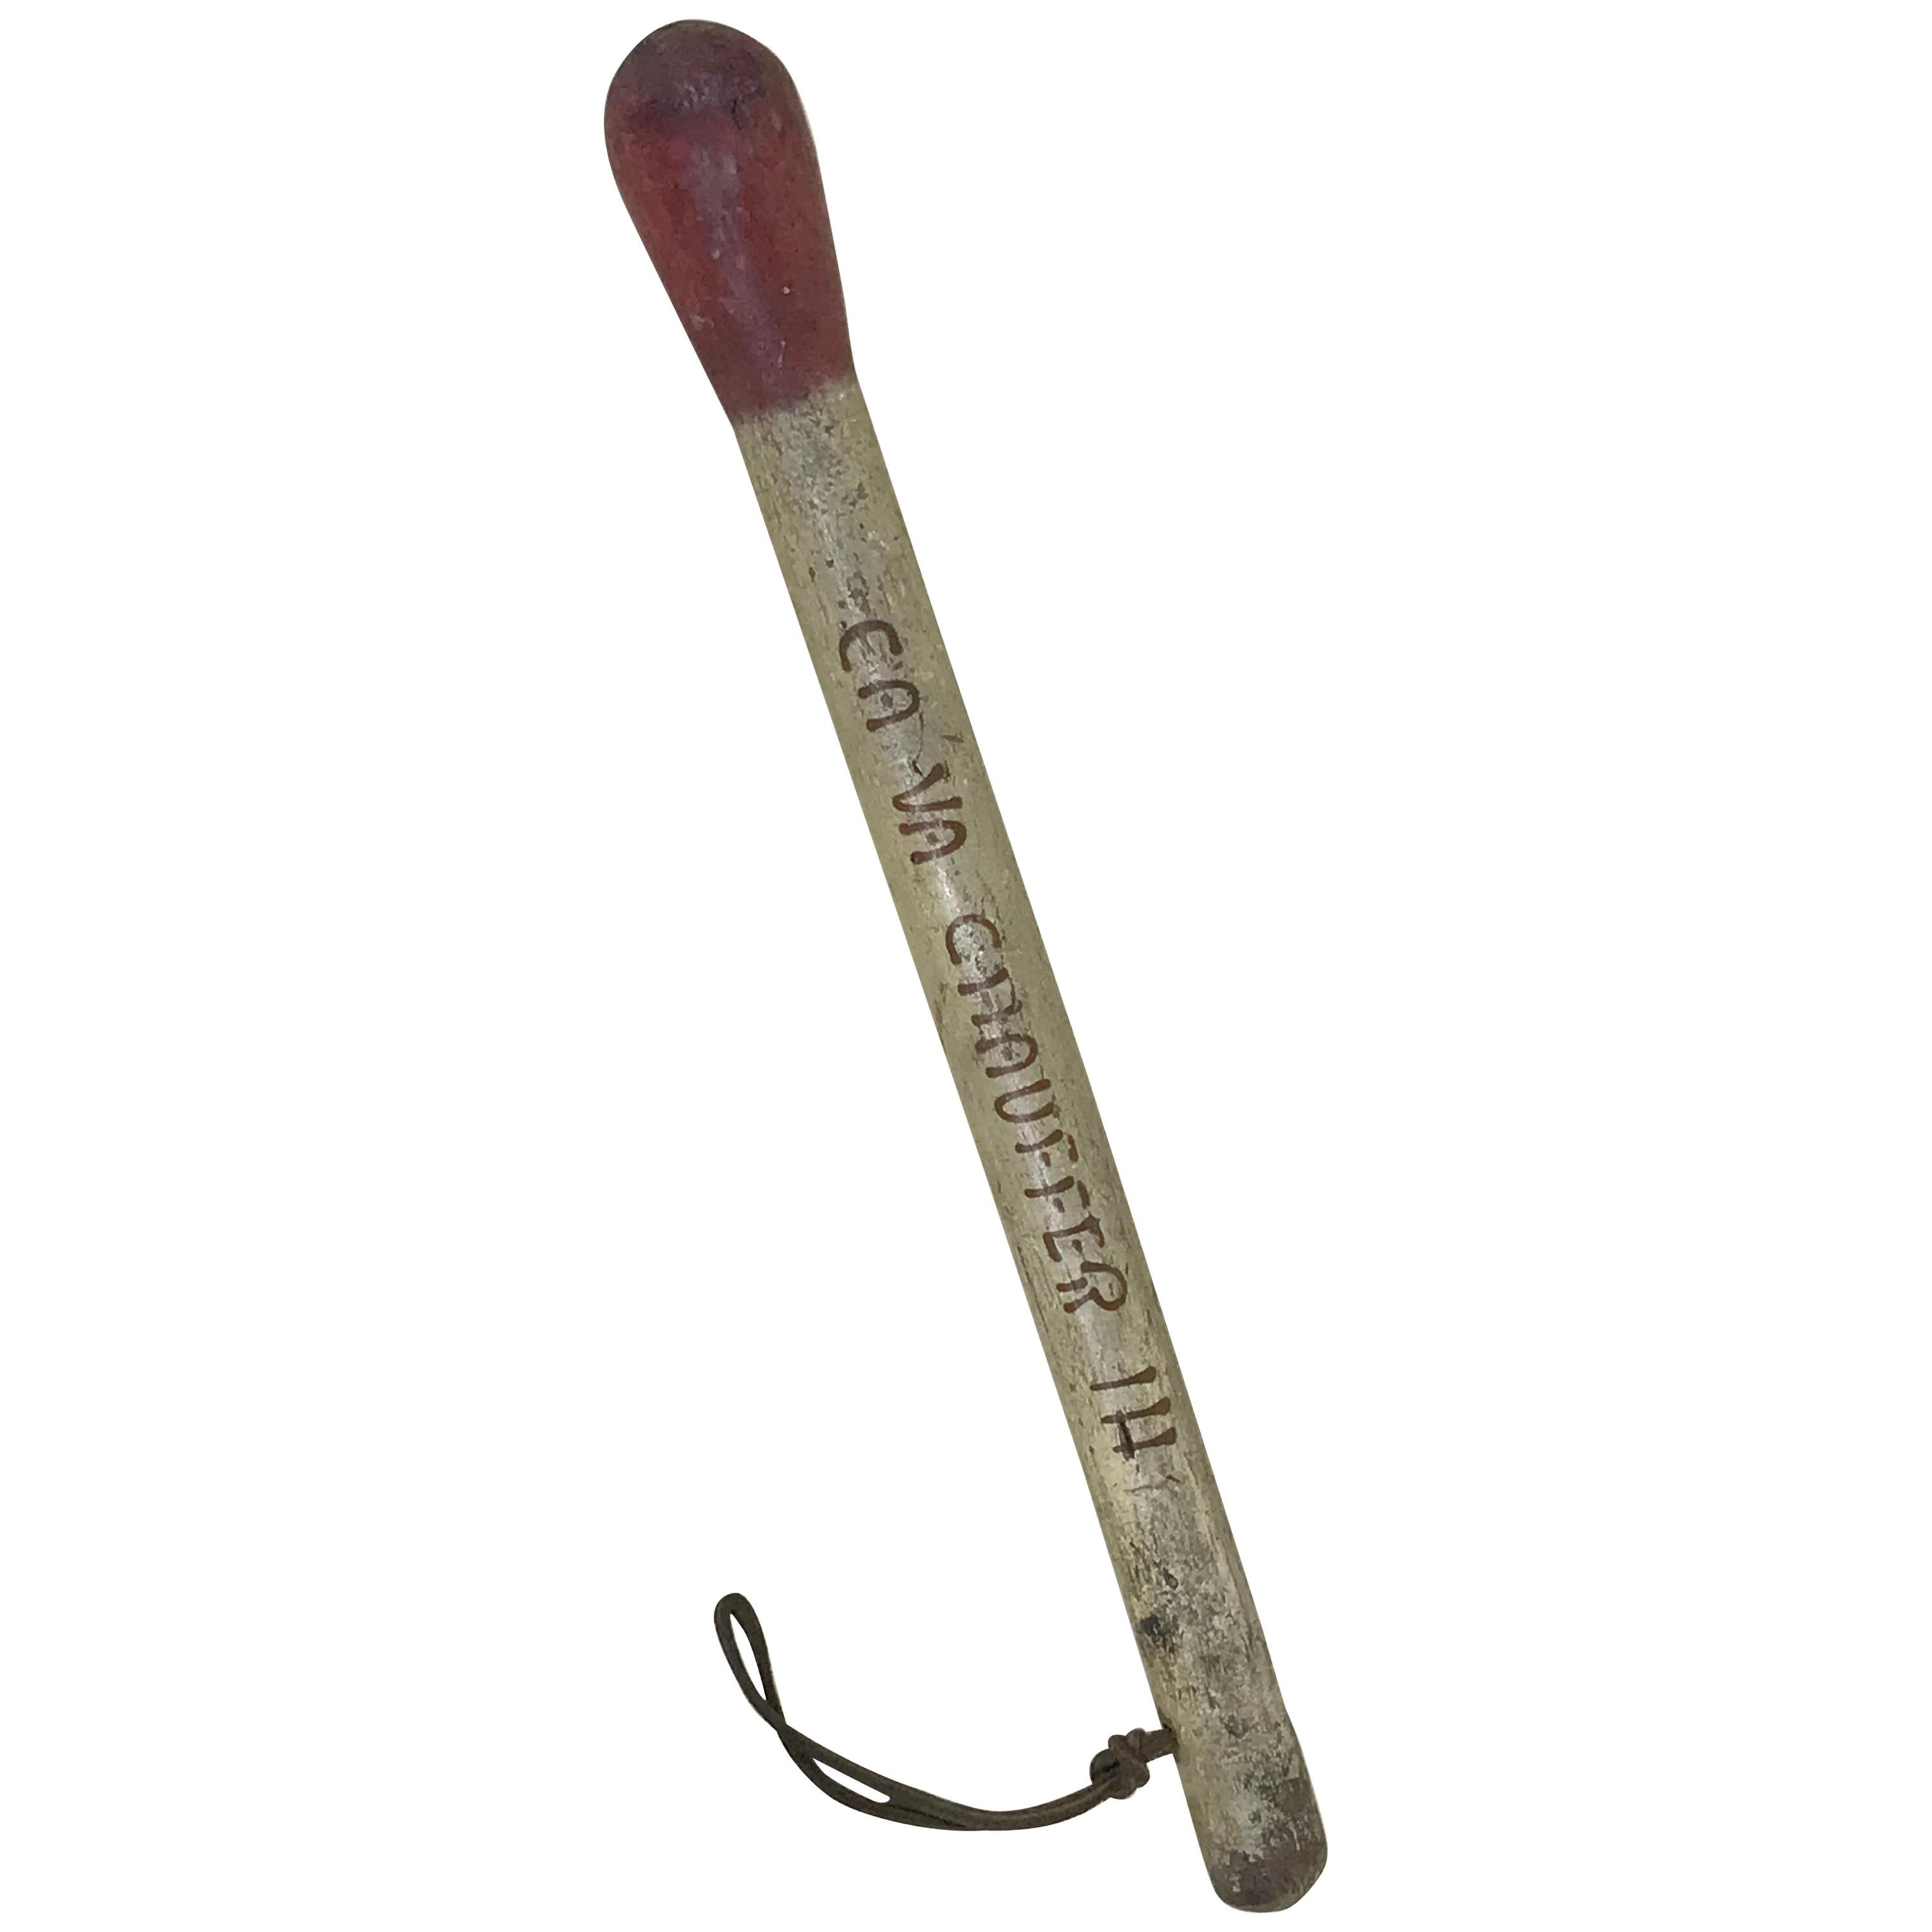 1890s French Wooden Stick Shaped like a Matchstick with Motto, Ça Va Chauffer